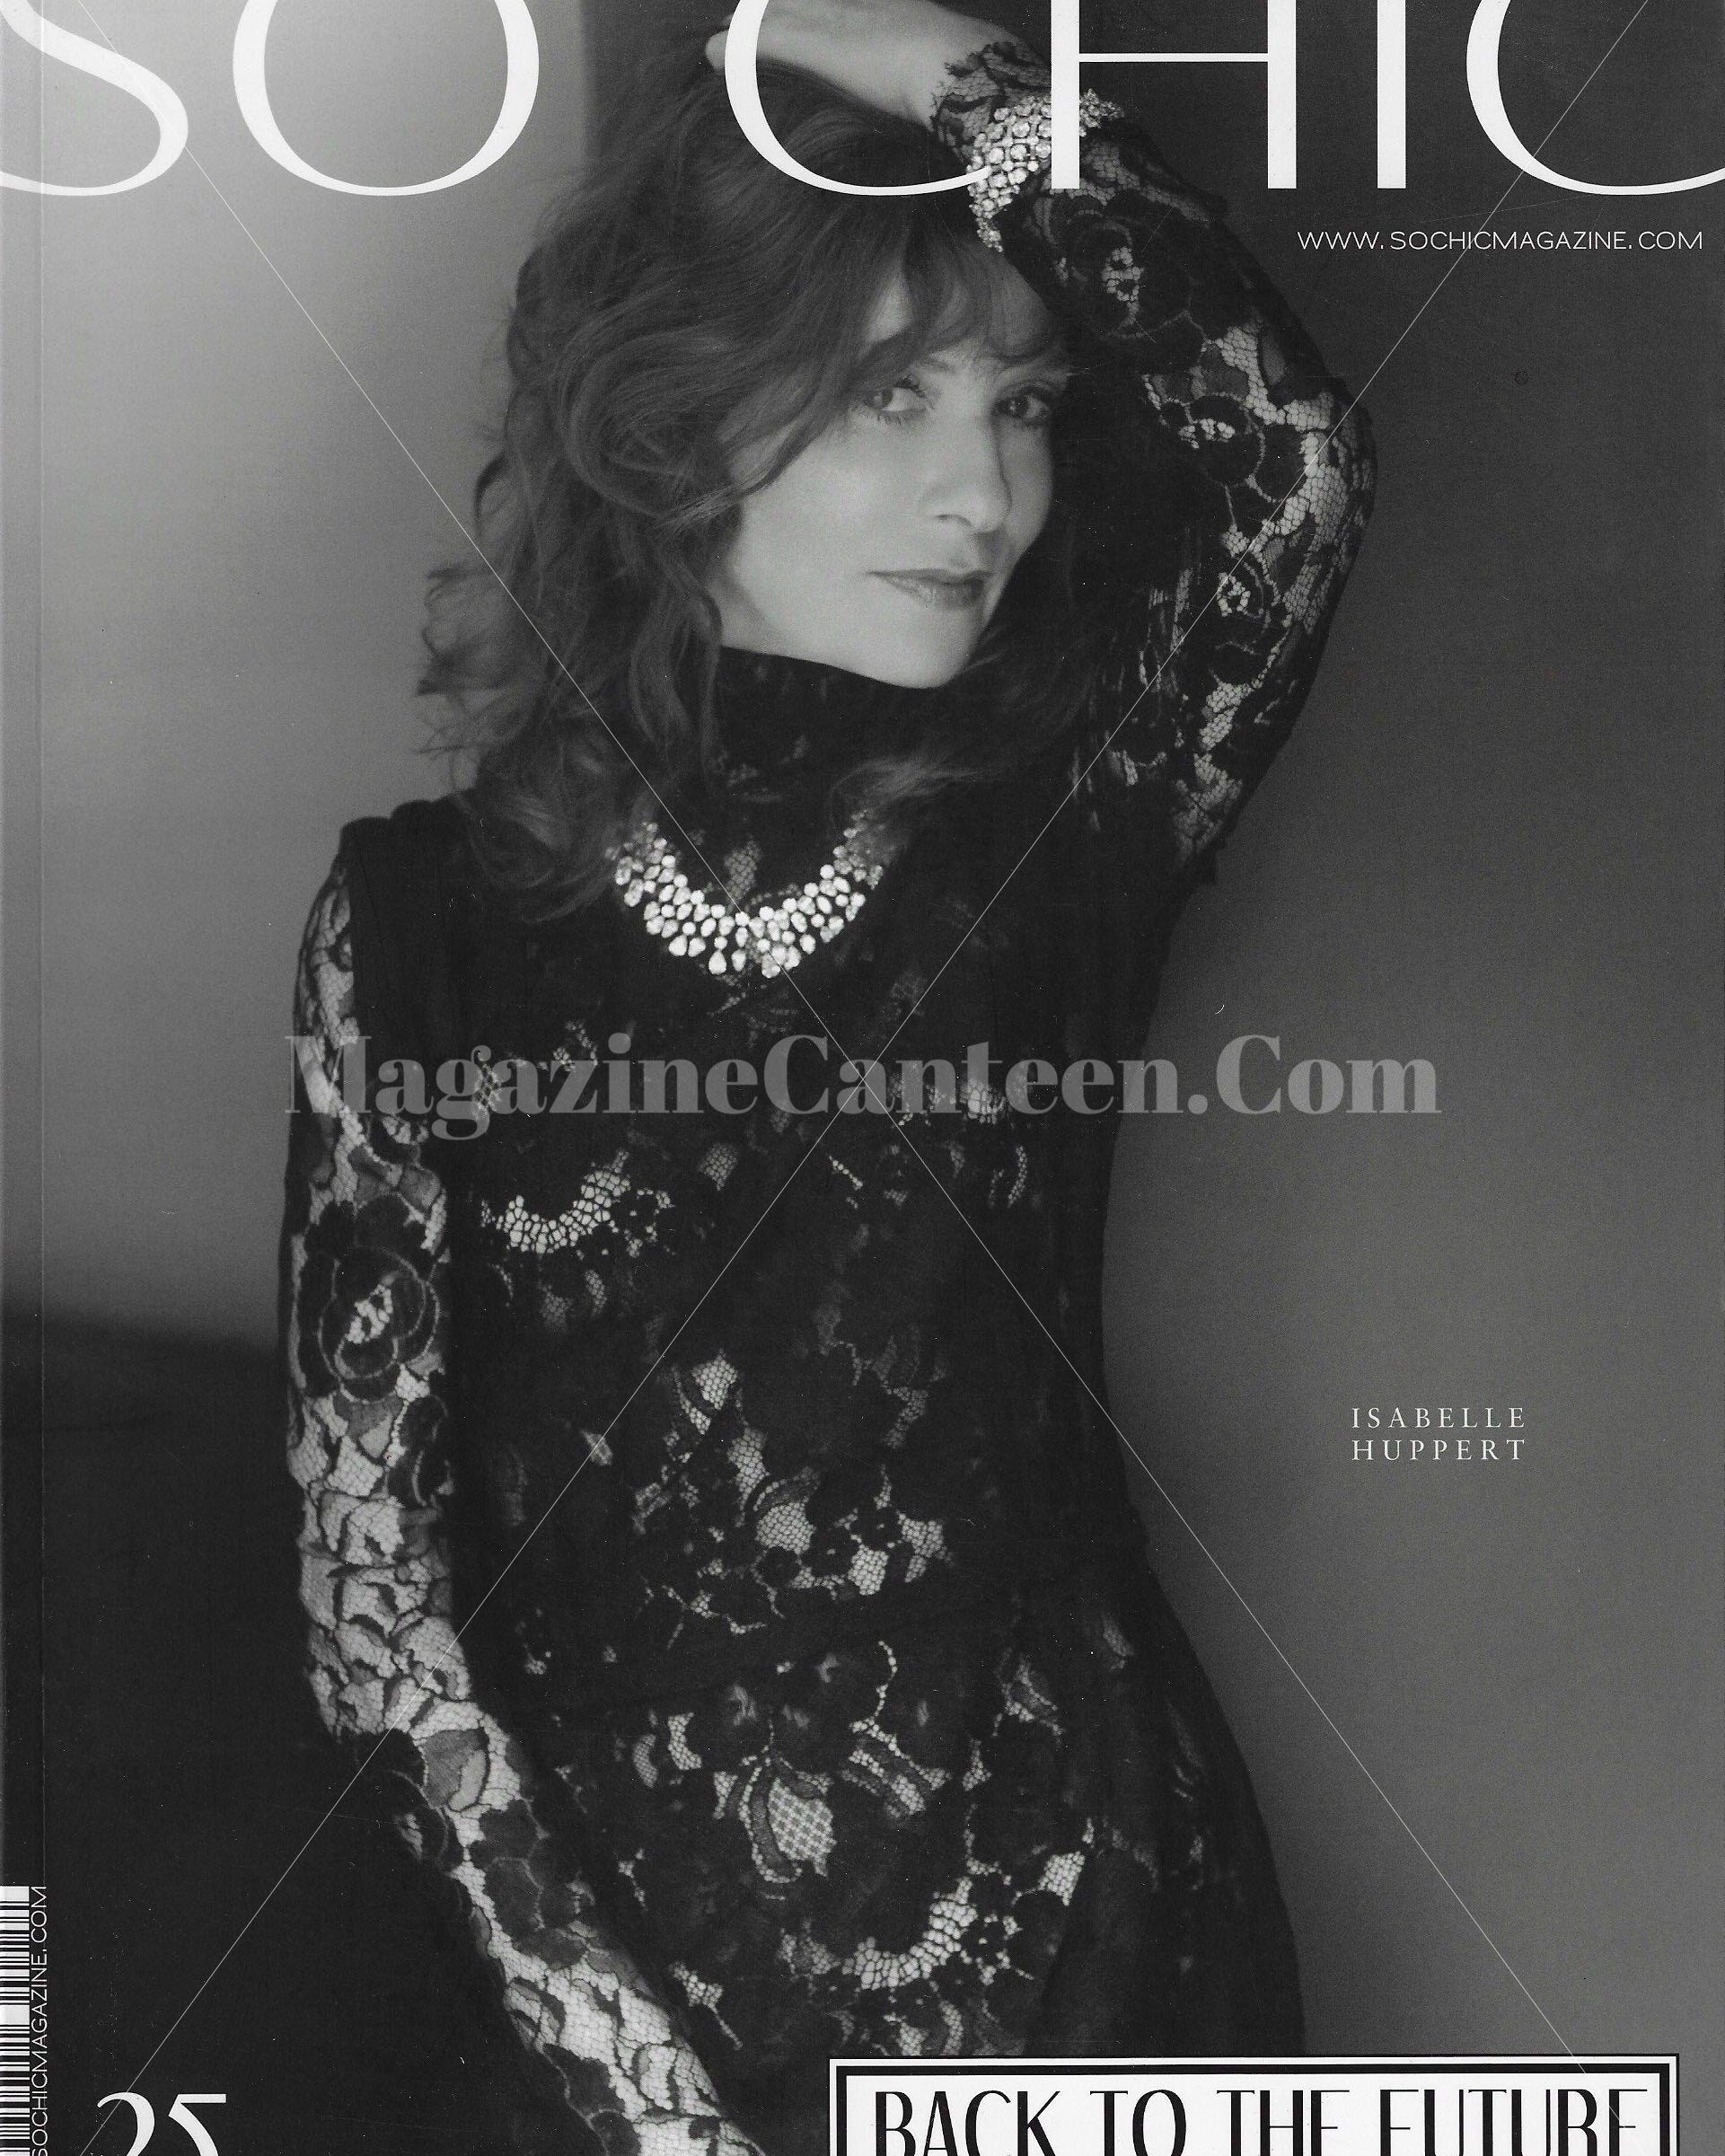 So Chic Magazine - Isabelle Huppert & Miguel Iglesias